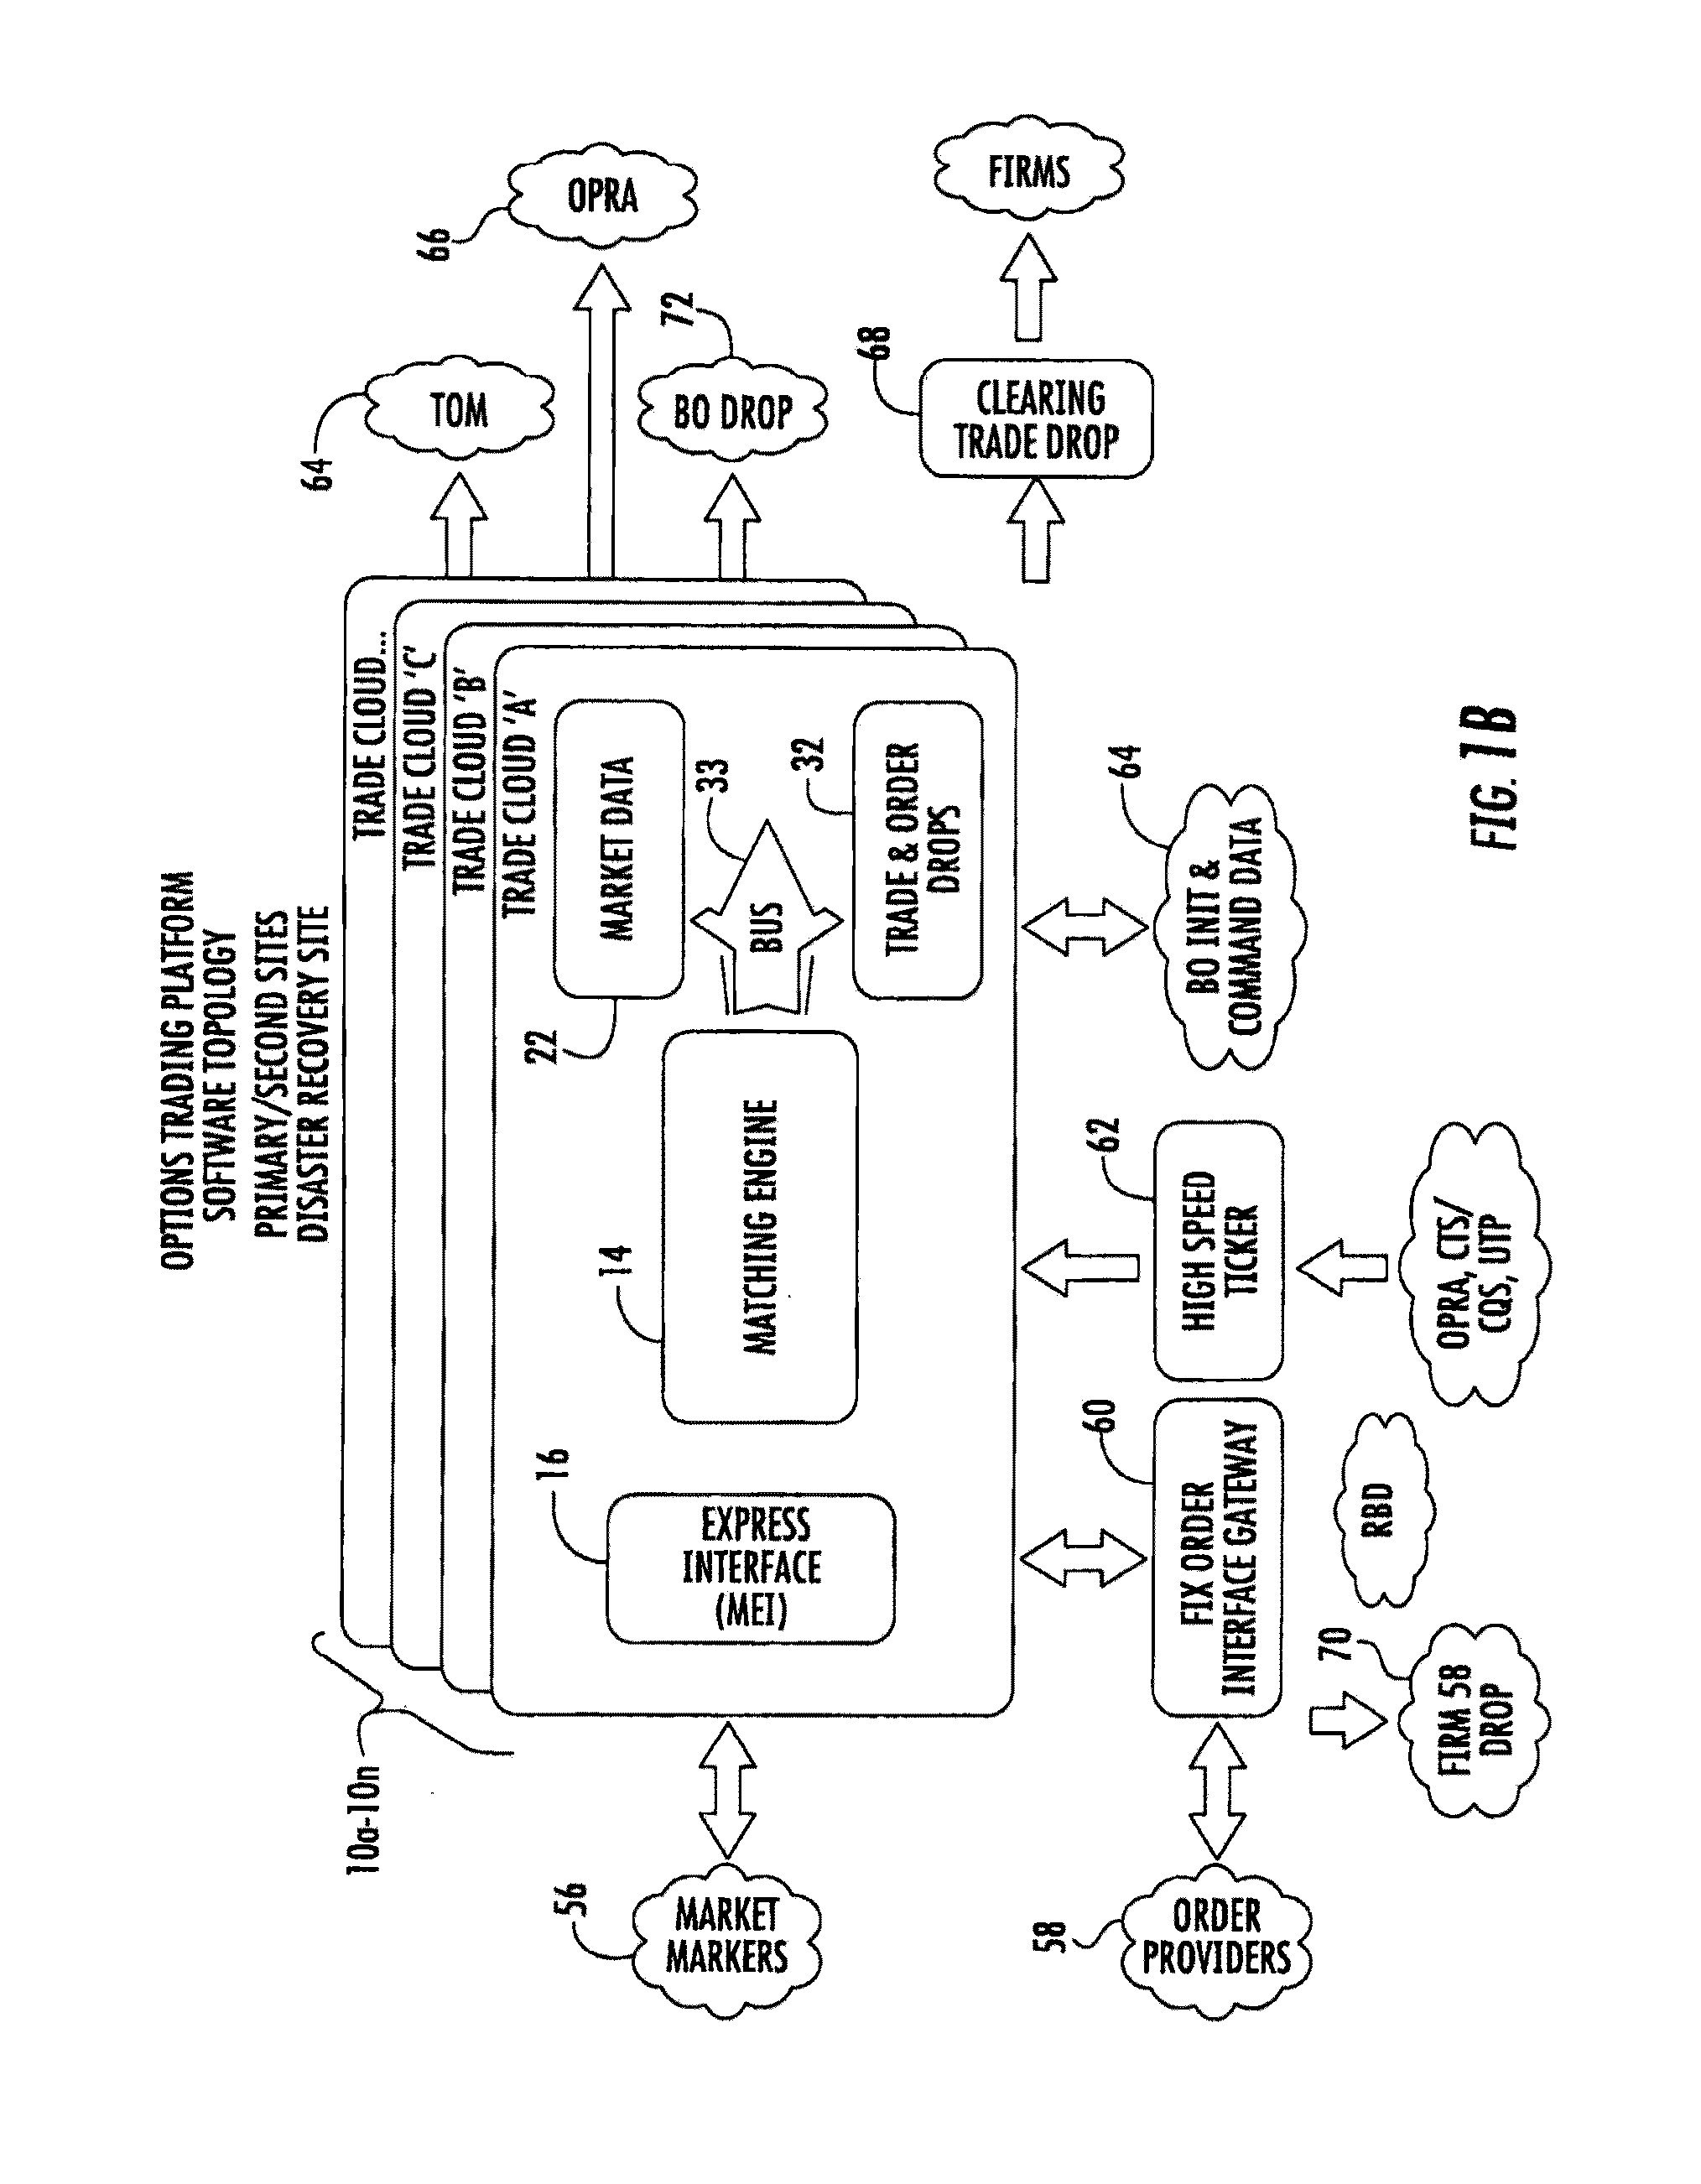 System and method for monitoring an equity rights transaction for strategic investors in a securities exchange